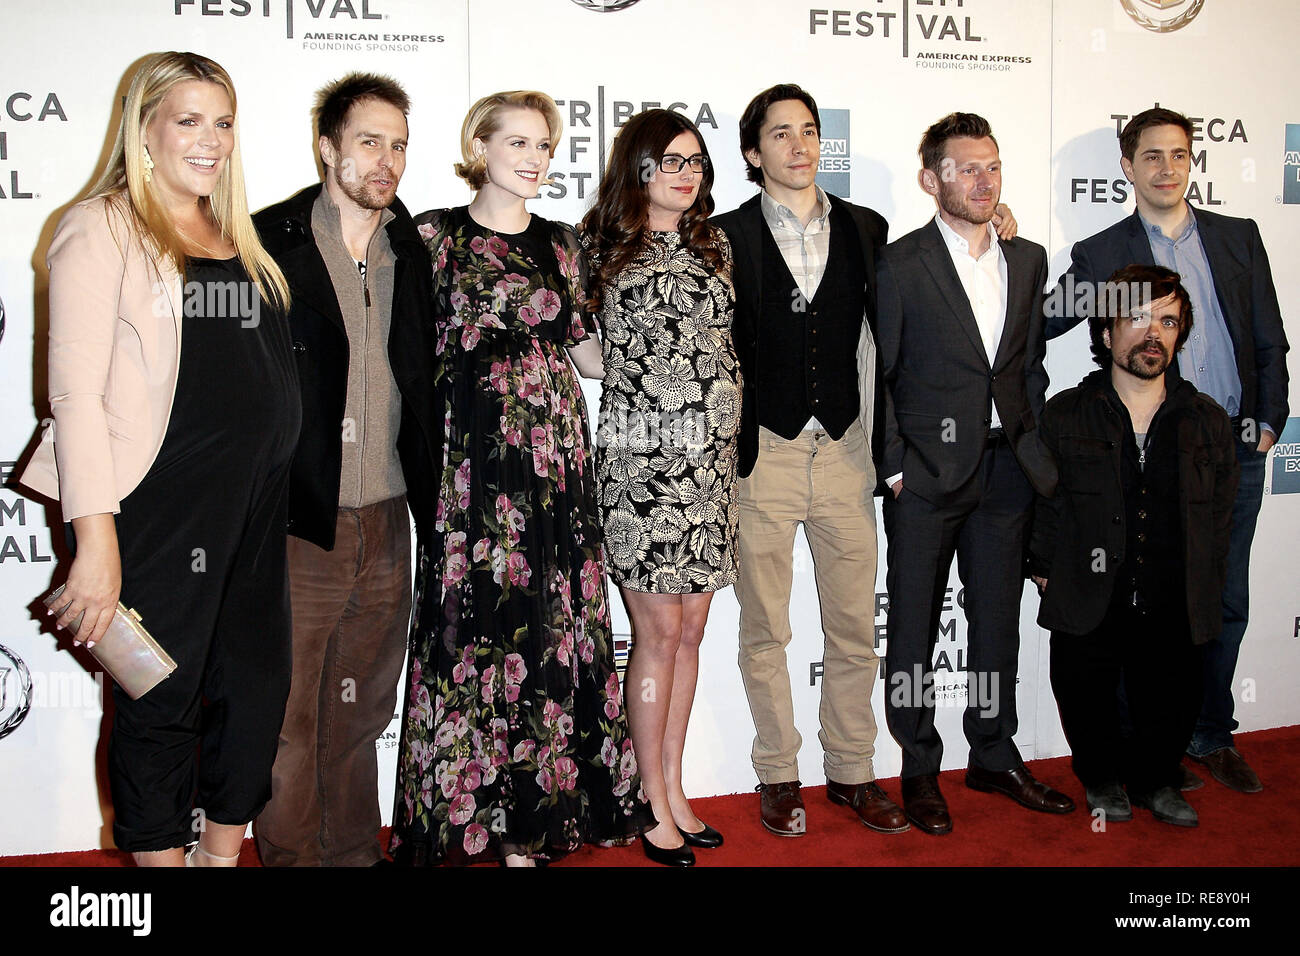 NEW YORK, NY - APRIL 21:  Busy Philipps, Sam Rockwell, Evan Rachel Wood, Kat Coiro, Justin Long, Keir O'Donnell, Peter Dinklage and Christian Long attend the screening of 'A Case of You' during the 2013 Tribeca Film Festival at BMCC Tribeca PAC on April 21, 2013 in New York City.  (Photo by Steve Mack/S.D. Mack Pictures) Stock Photo